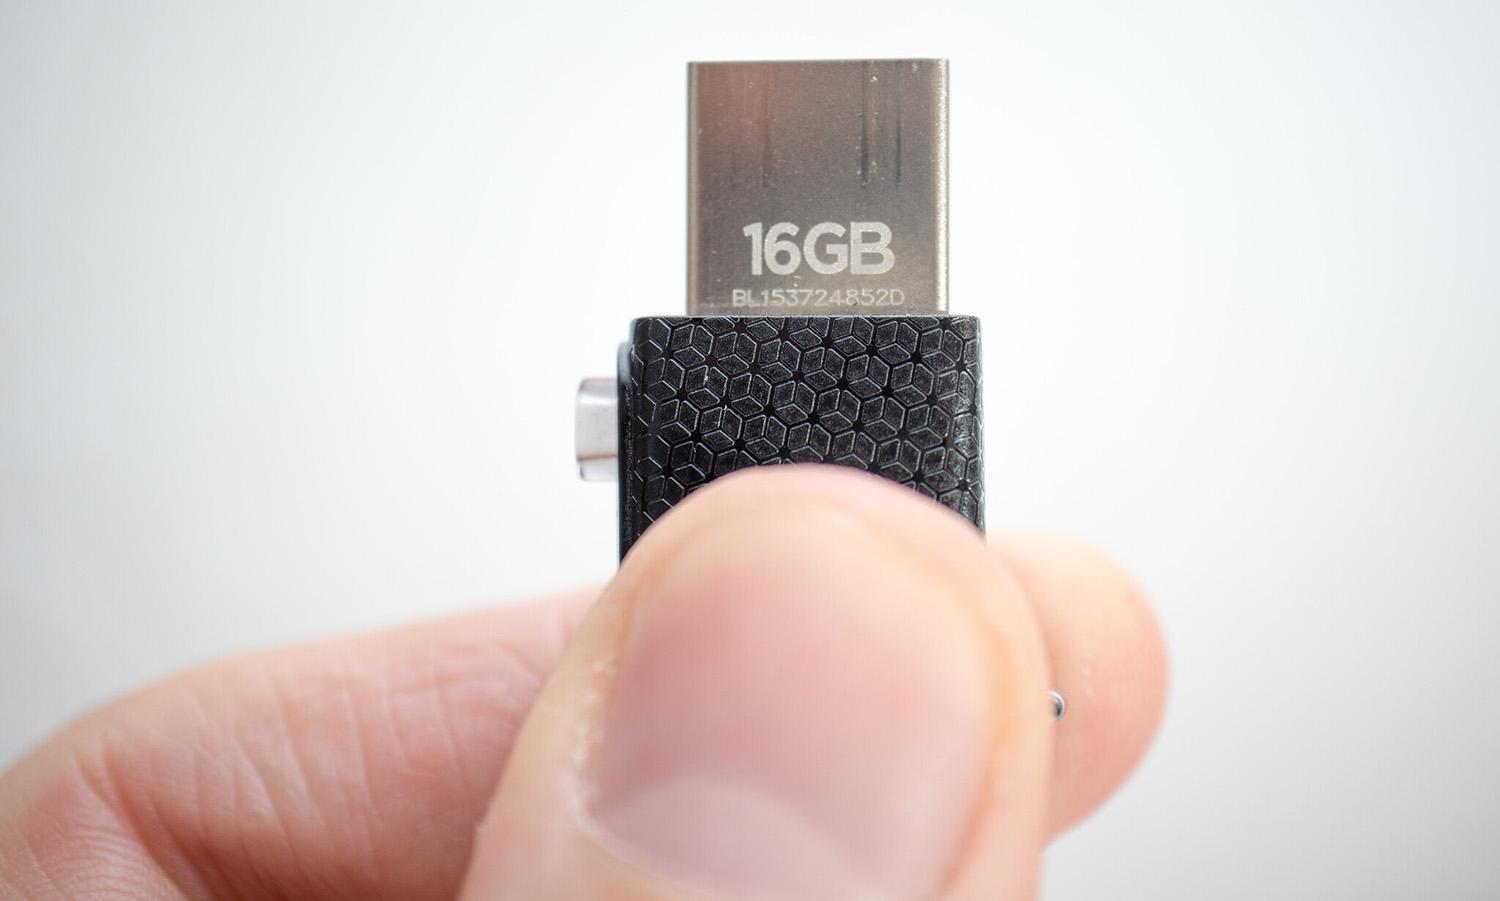 The FIN7 cyber gang is sending malicious USB devices to U.S. companies, the FBI warned in an alert. (&#8220;Man holding a USB drive in hand. Handing over top secret data&#8221; by Ivan Radic is licensed under CC BY 2.0)